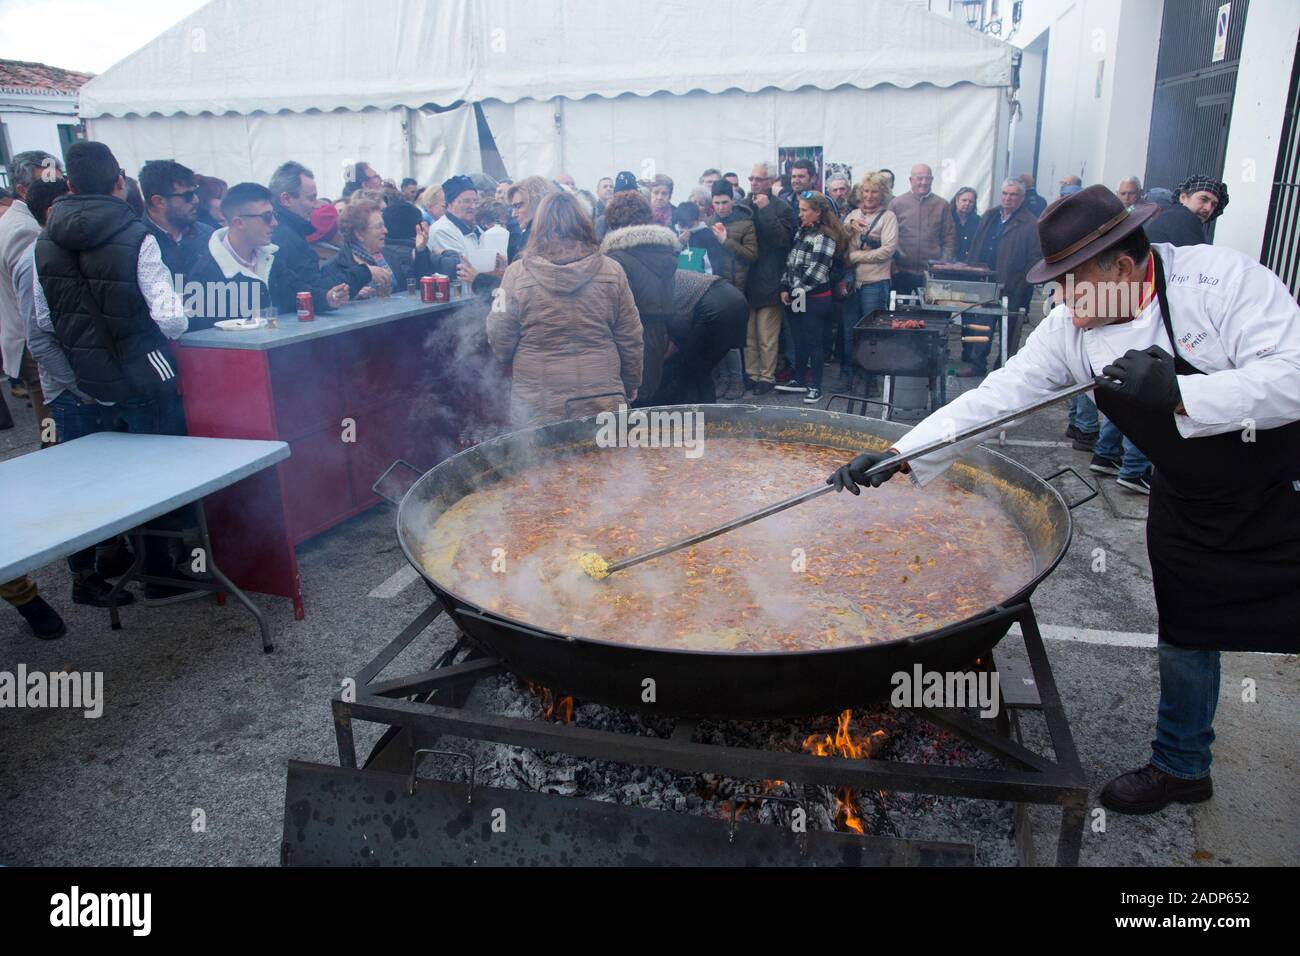 A man stirs an enormous dish of paella cooking over a firepit in Canillas de Albaida, Andalusia, Spain. Stock Photo